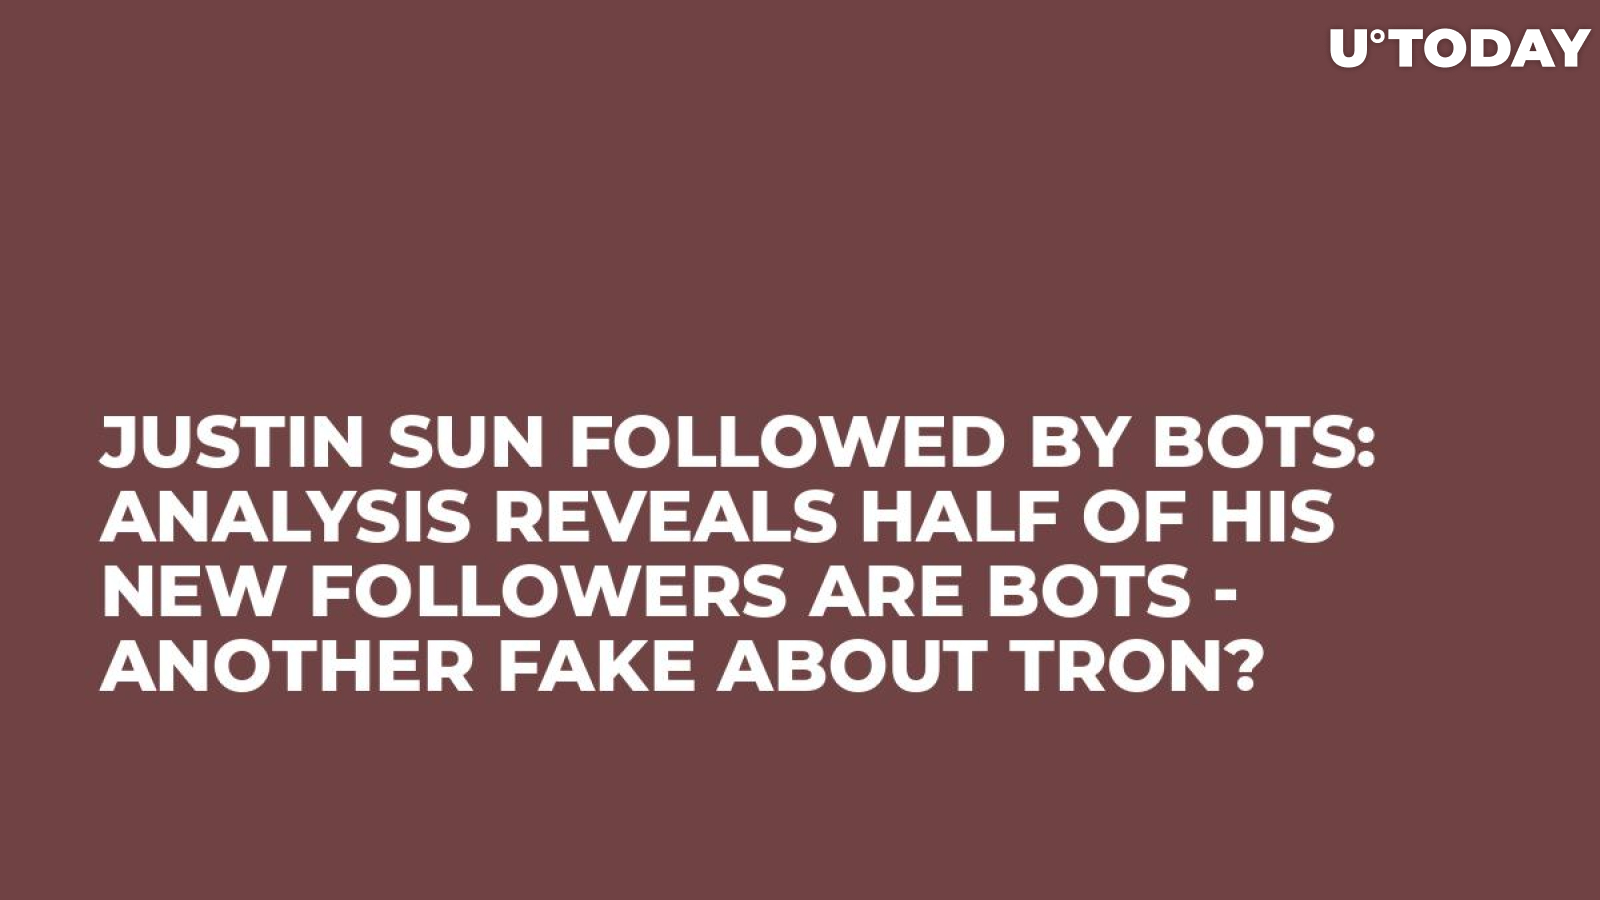 Justin Sun Followed by Bots: Analysis Reveals Half of His New Followers Are Bots - Another Fake About Tron?